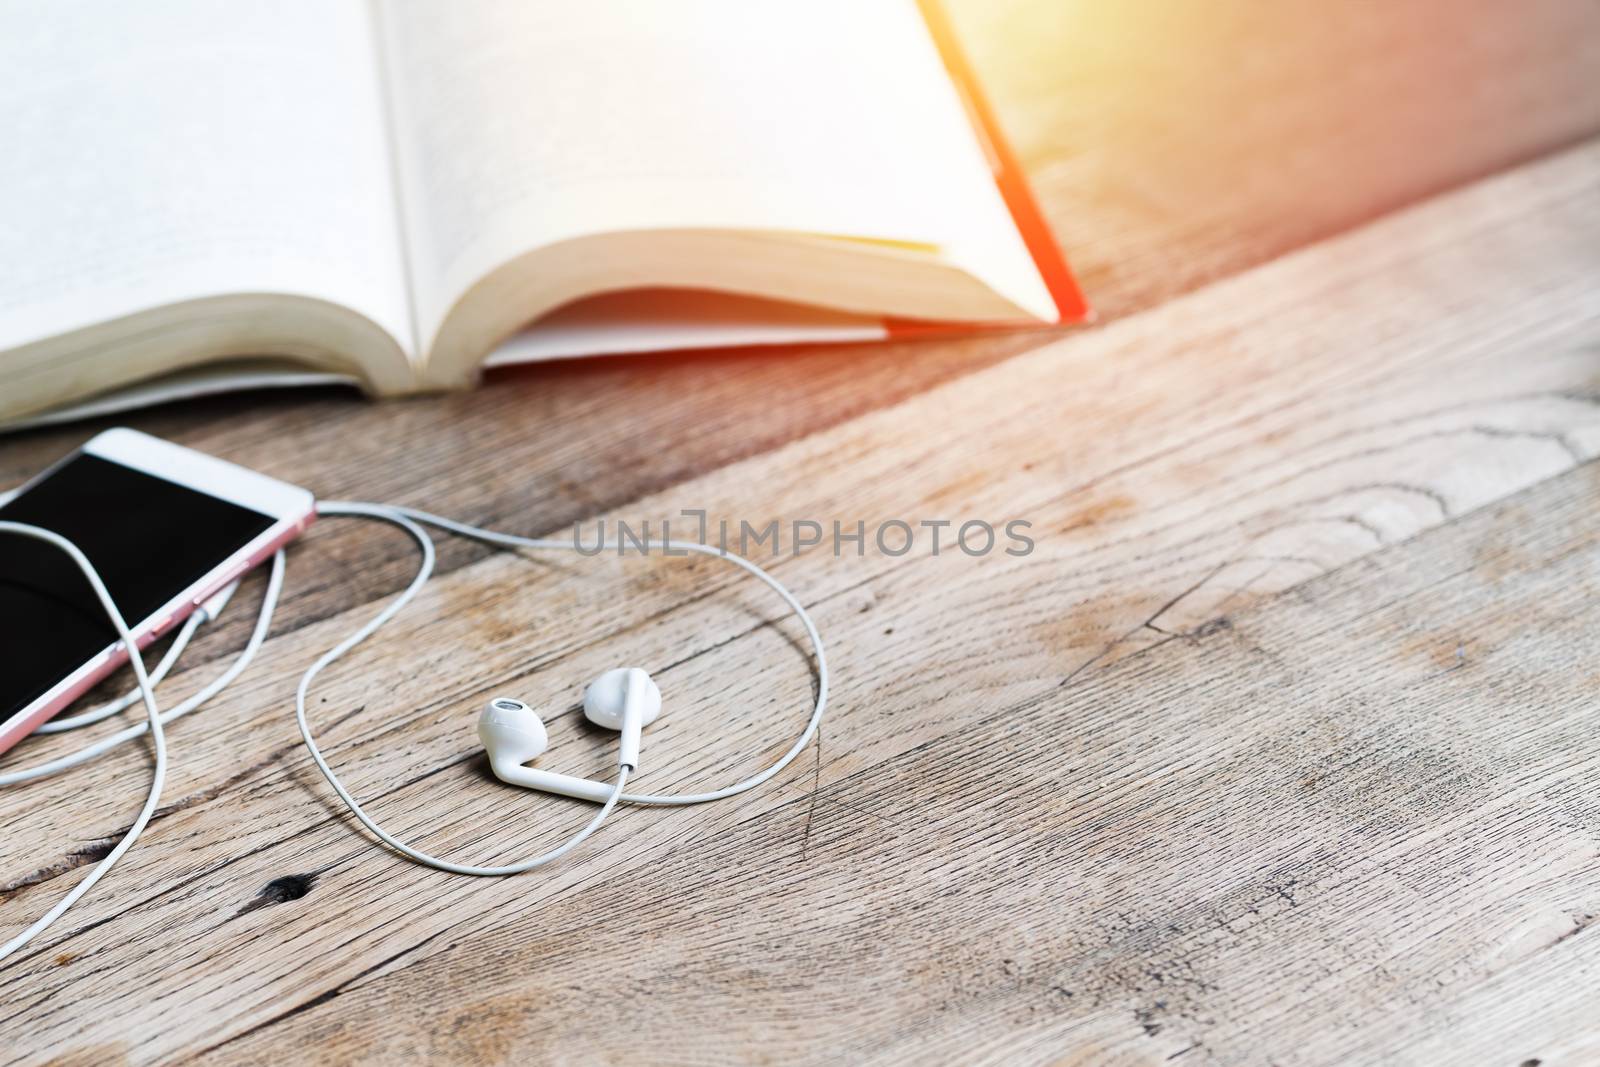 white heart shape earphone with smartphone and open book on working table top view with copy space